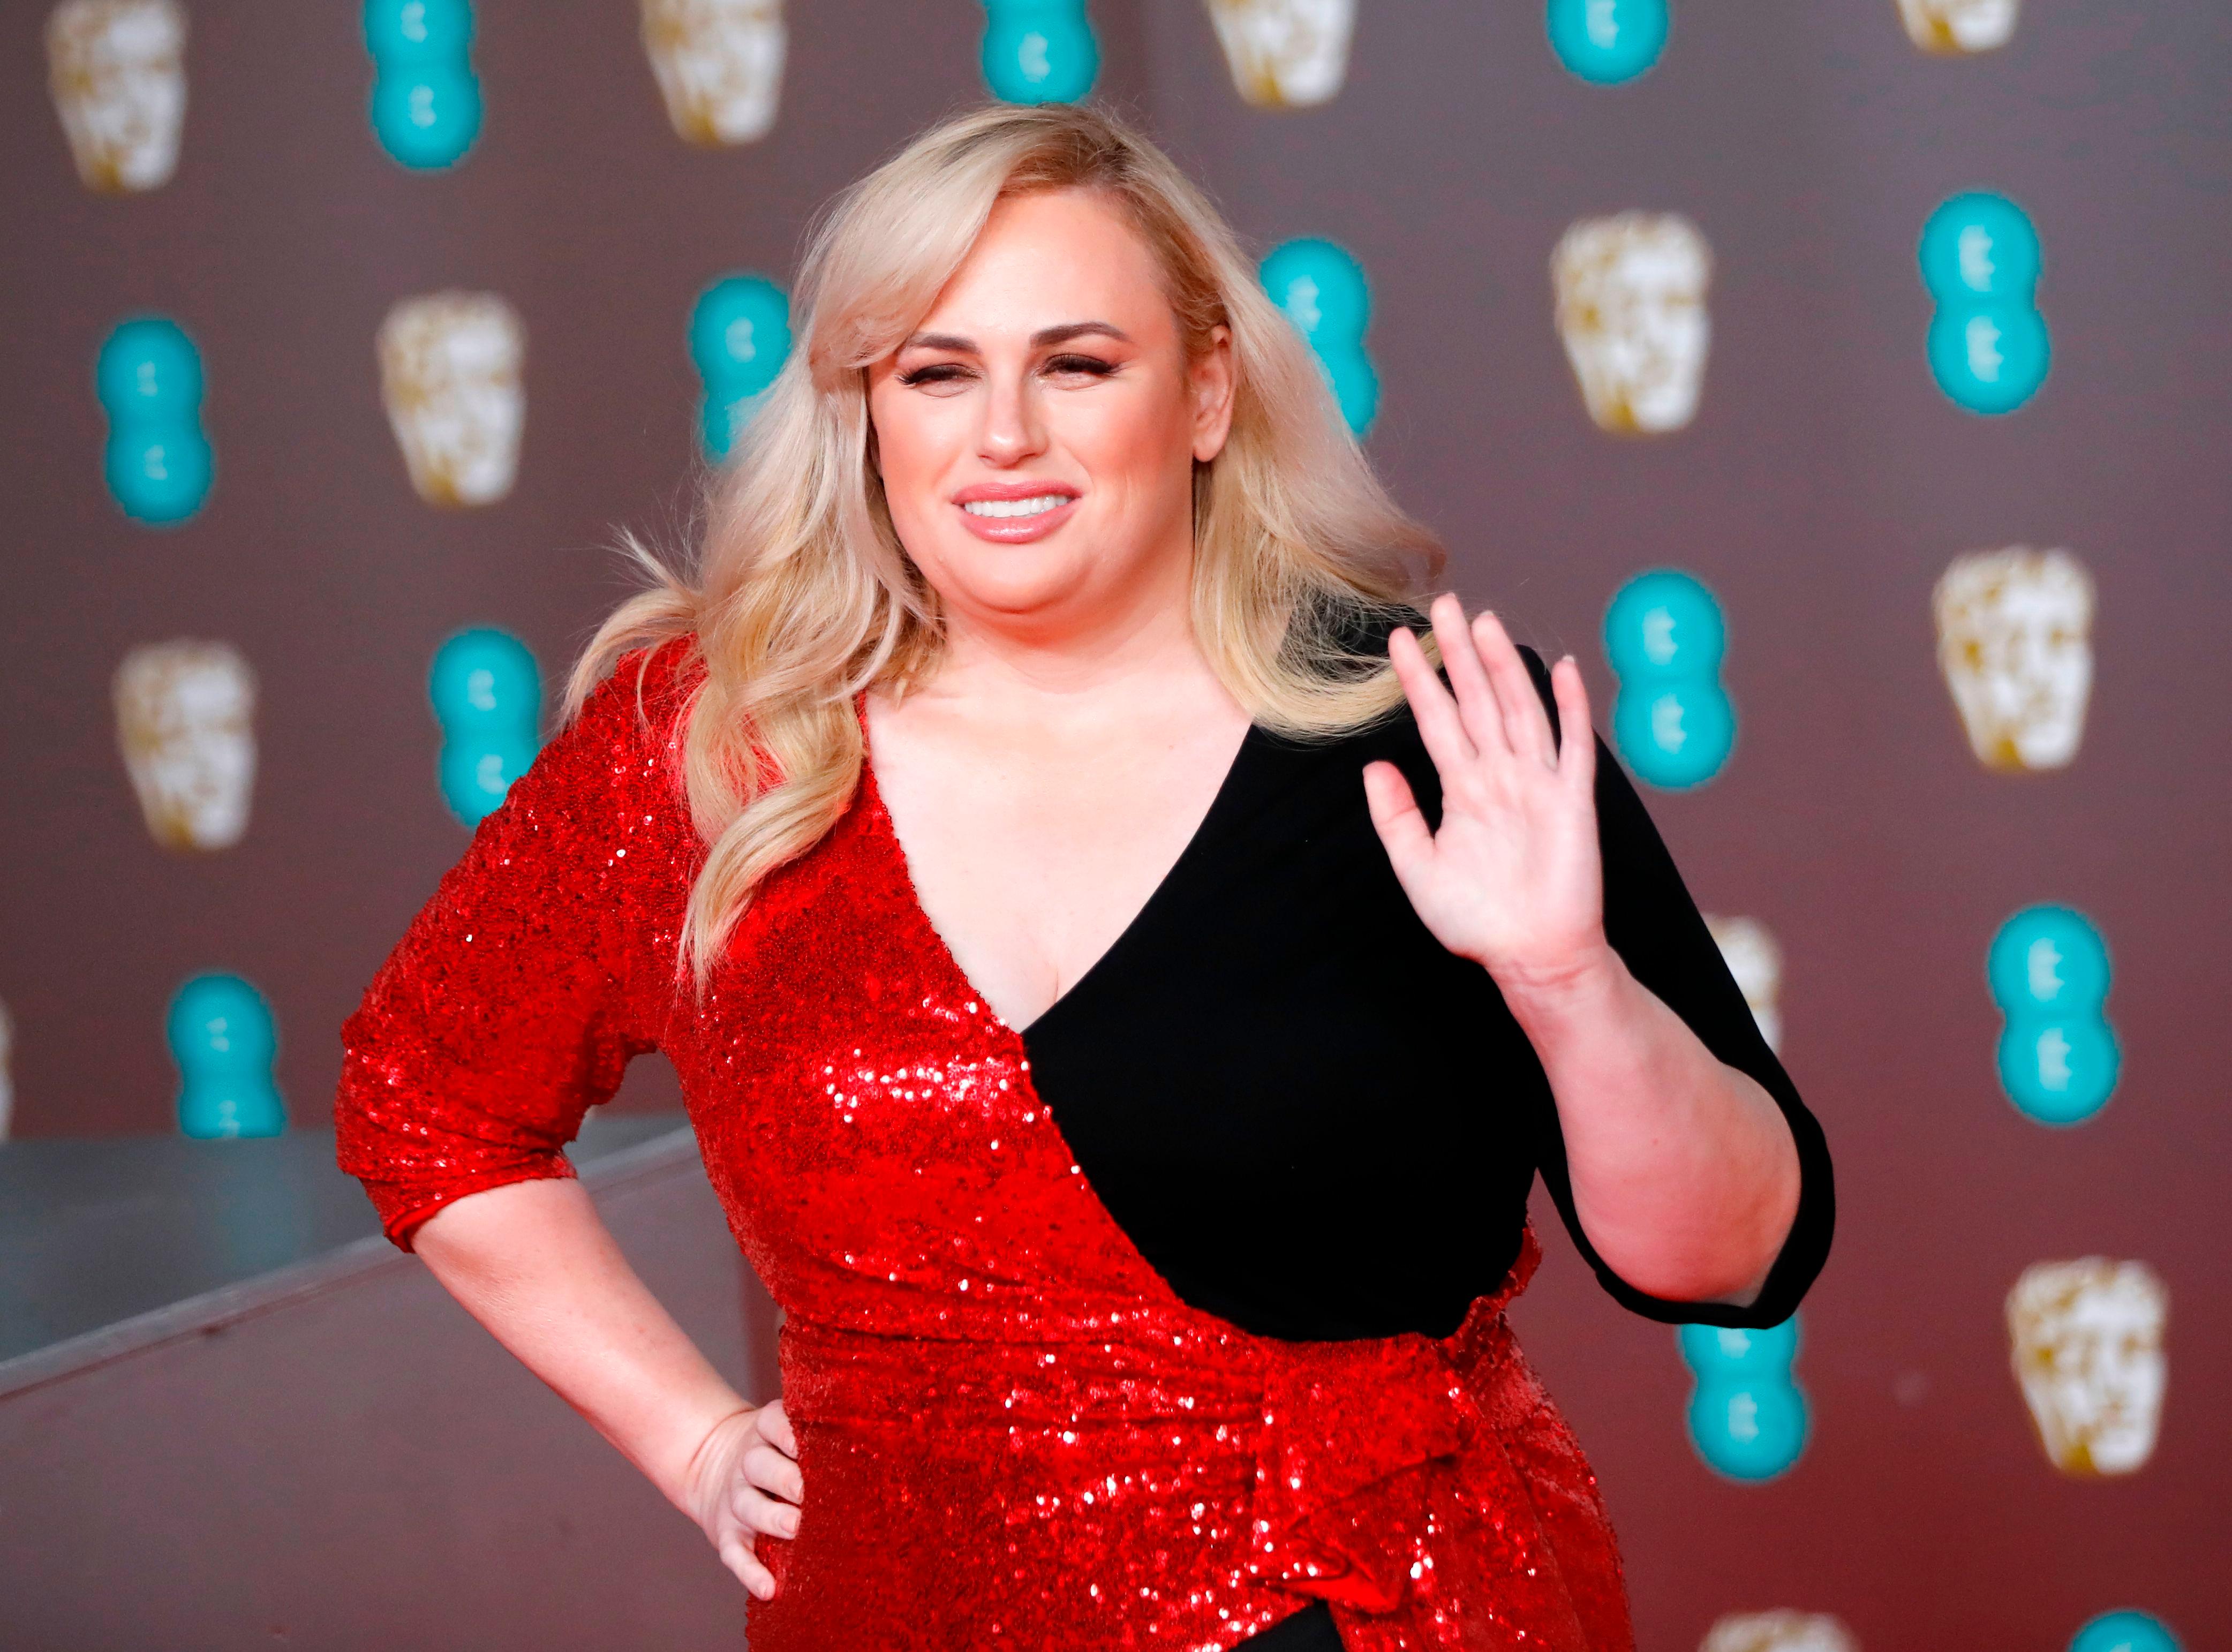 Did Rebel Wilson Anger Kate Middleton and Prince William With Her Jokes?